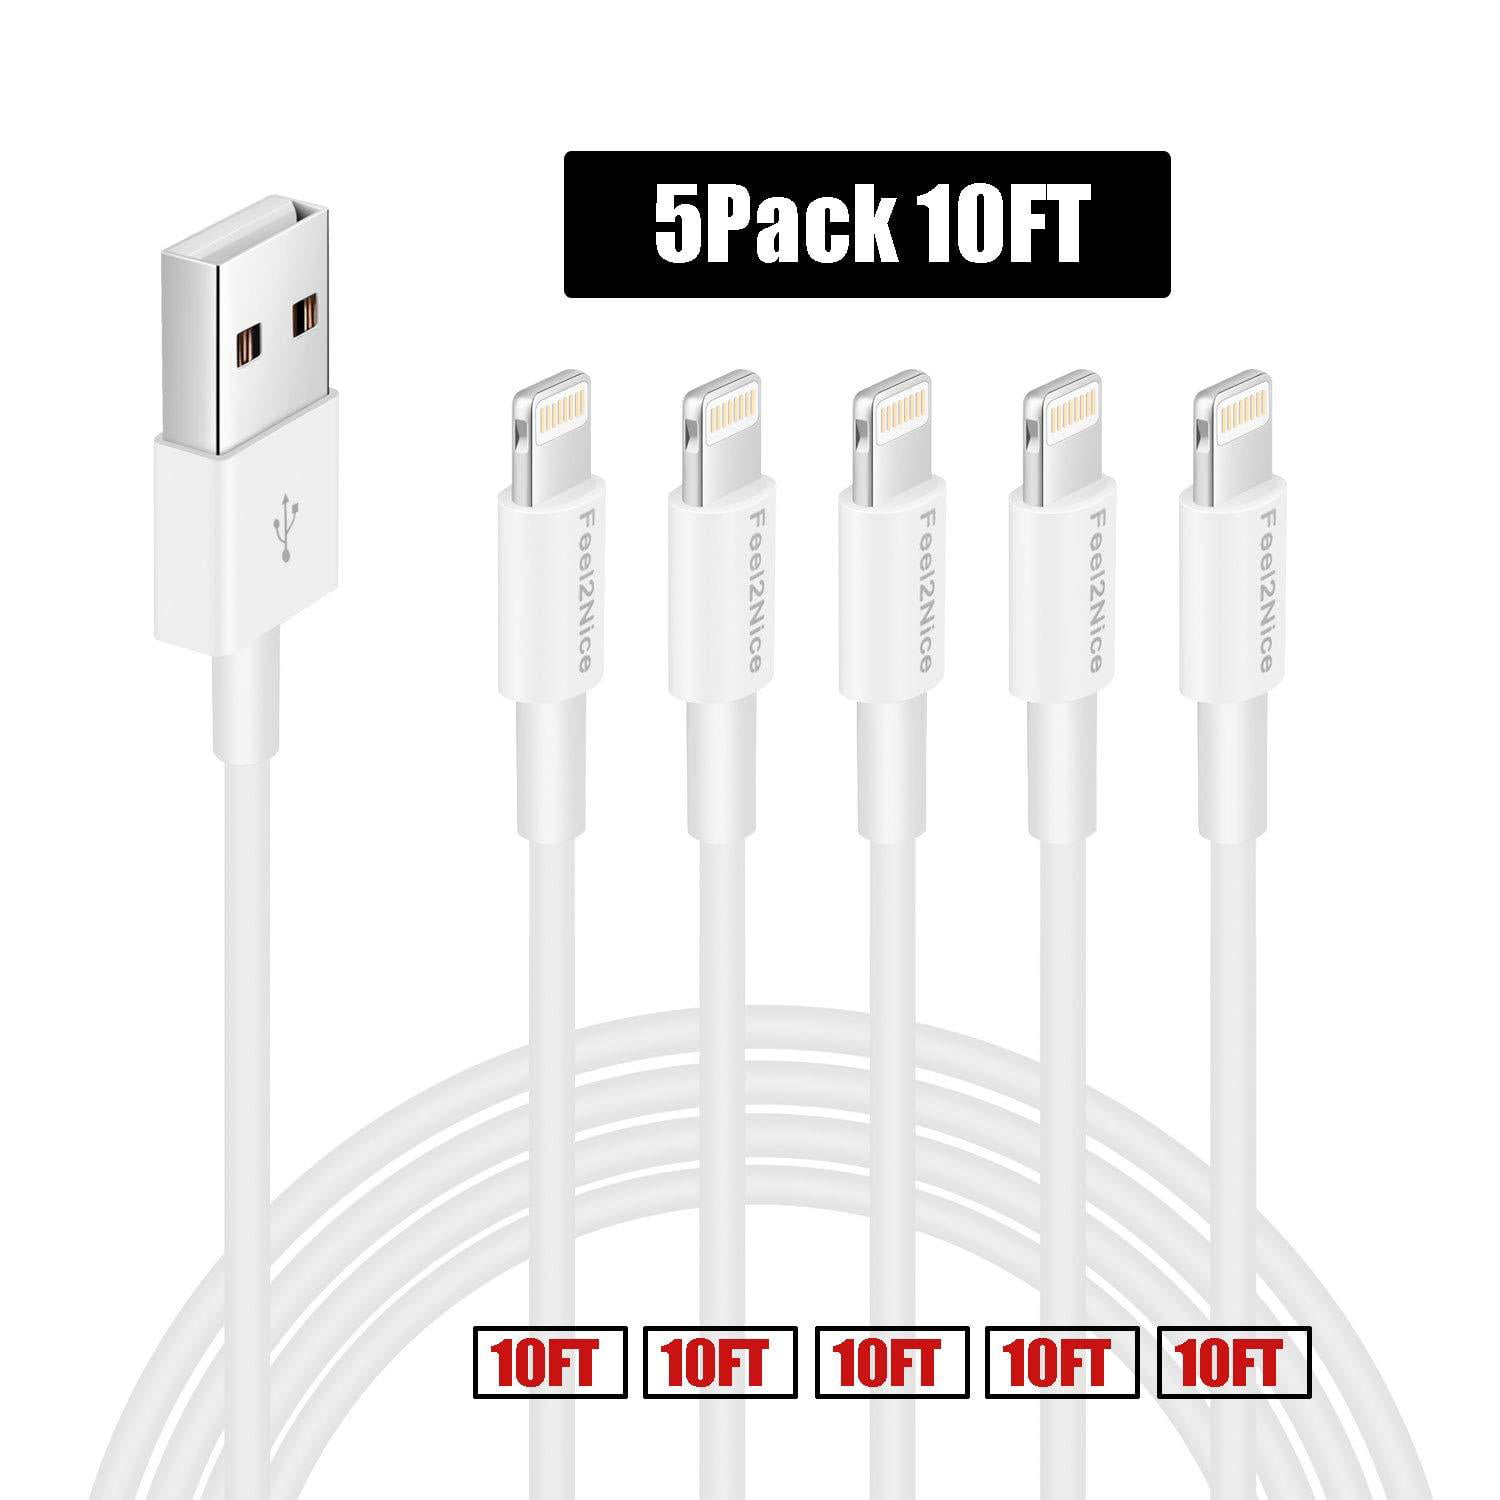 Lightning Cable Iseason iPhone Charger Cables 3Pack 3FT 6FT 10FT to USB Syncing Data and Nylon Braided Cord Charger for iPhone X/8/8Plus/7/7Plus/6/6Plus/6s/6sPlus/5/5s/5c/SE and More Sk-123-YH-Bred-01 BlackRed 